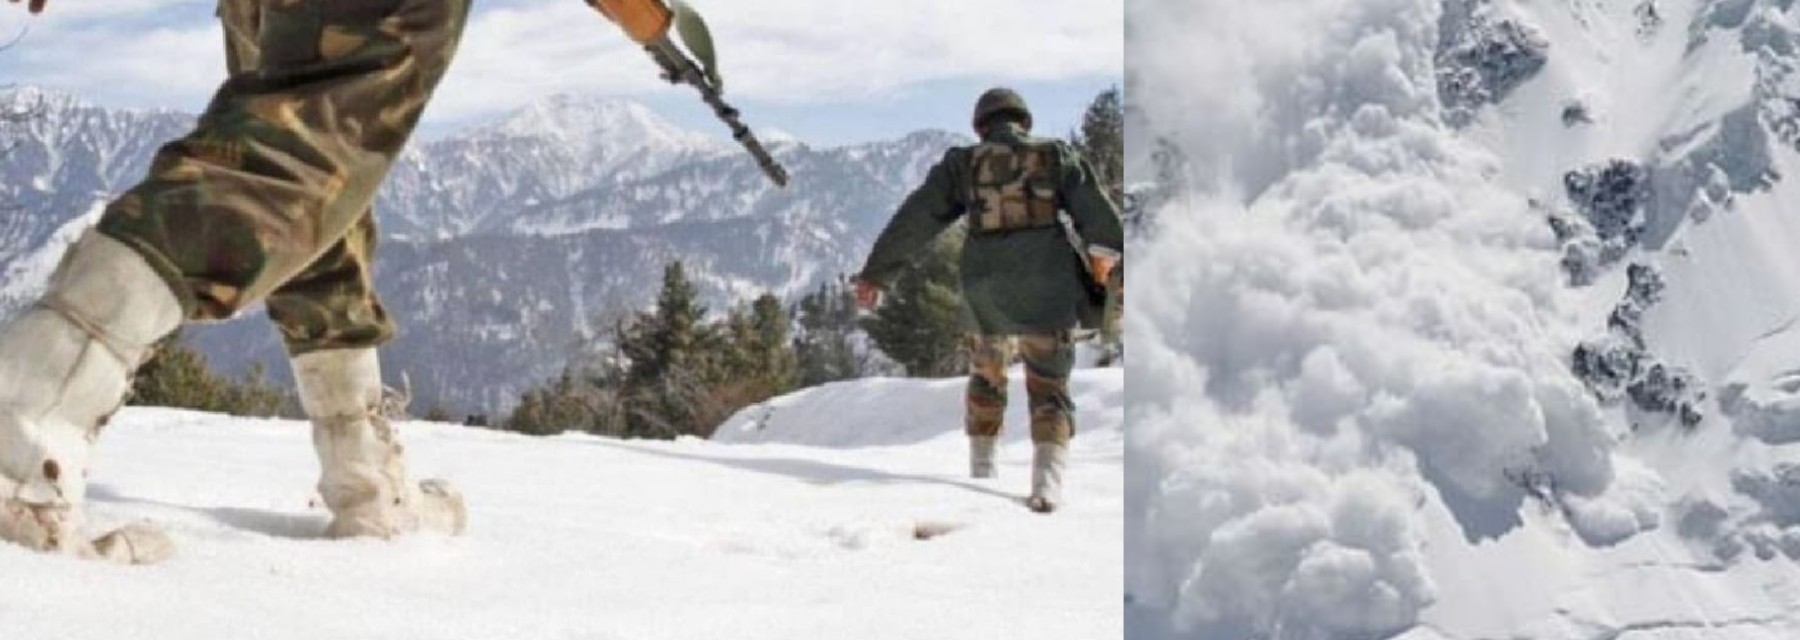 National news: three Indian army soldiers martyred on the Jammu and Kashmir LoC border. Indian army jammu kashmir